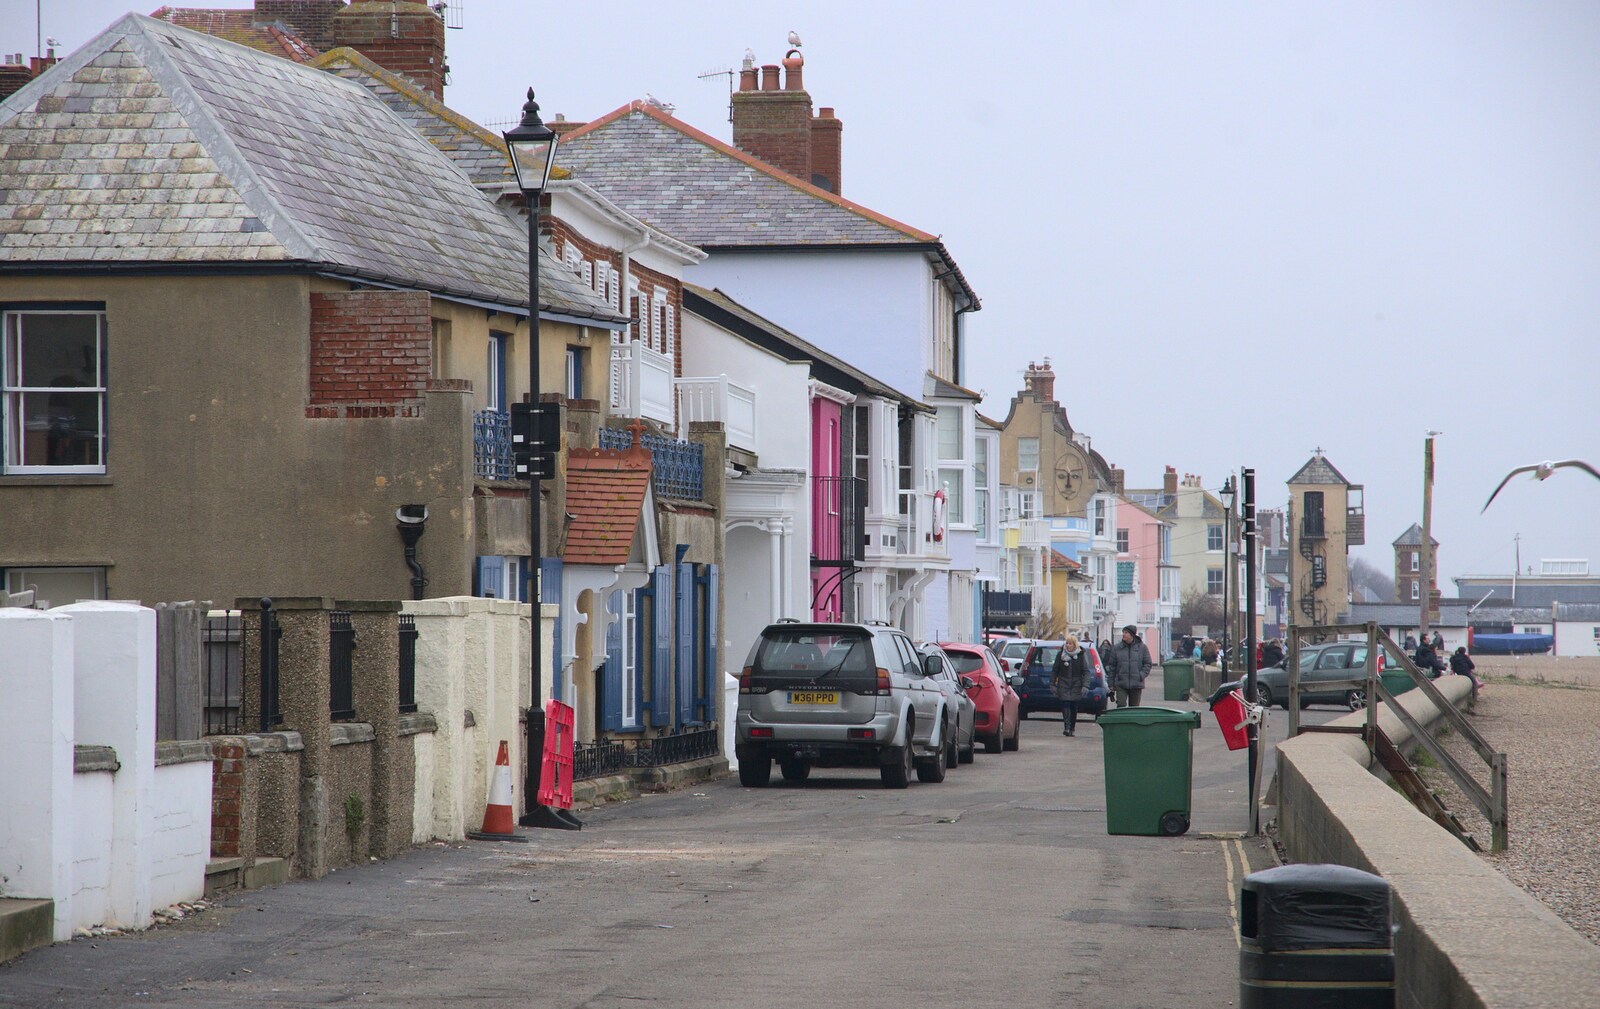 Aldeburgh sea front from A Postcard from Aldeburgh, Suffolk - 6th January 2019